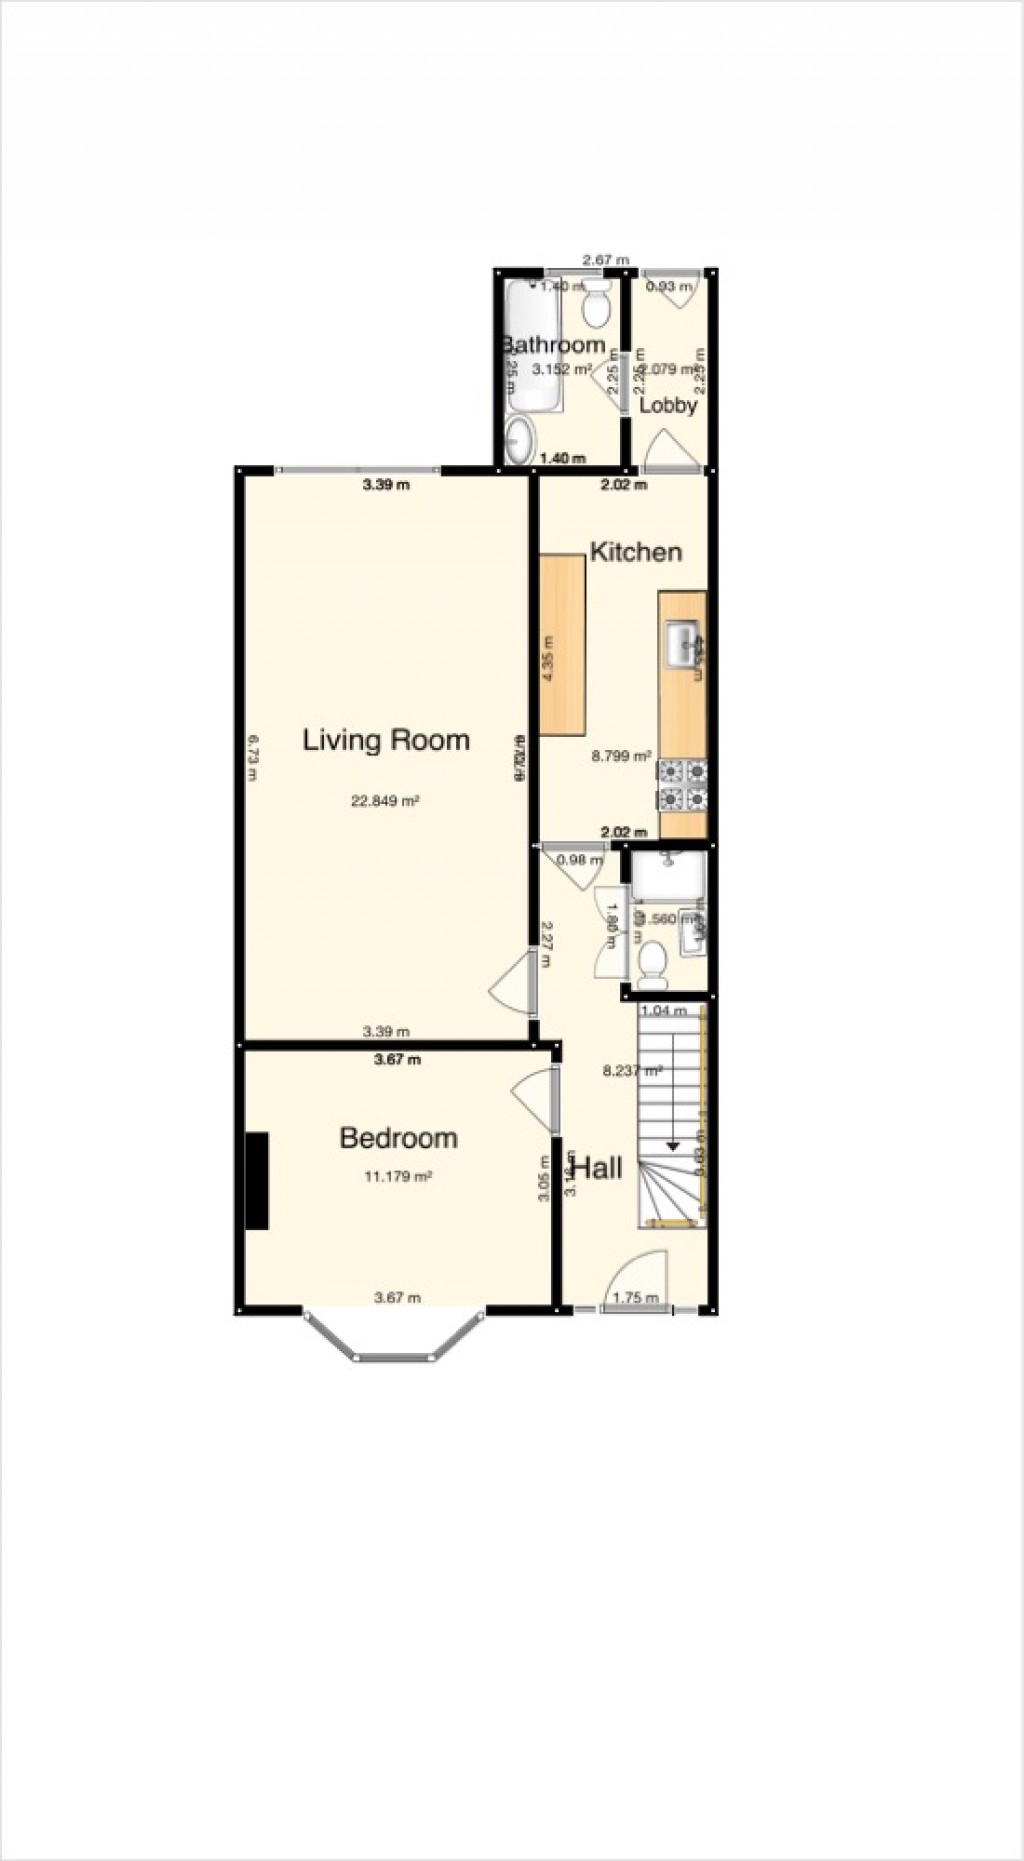 Floorplans For Cowley Road, Oxford